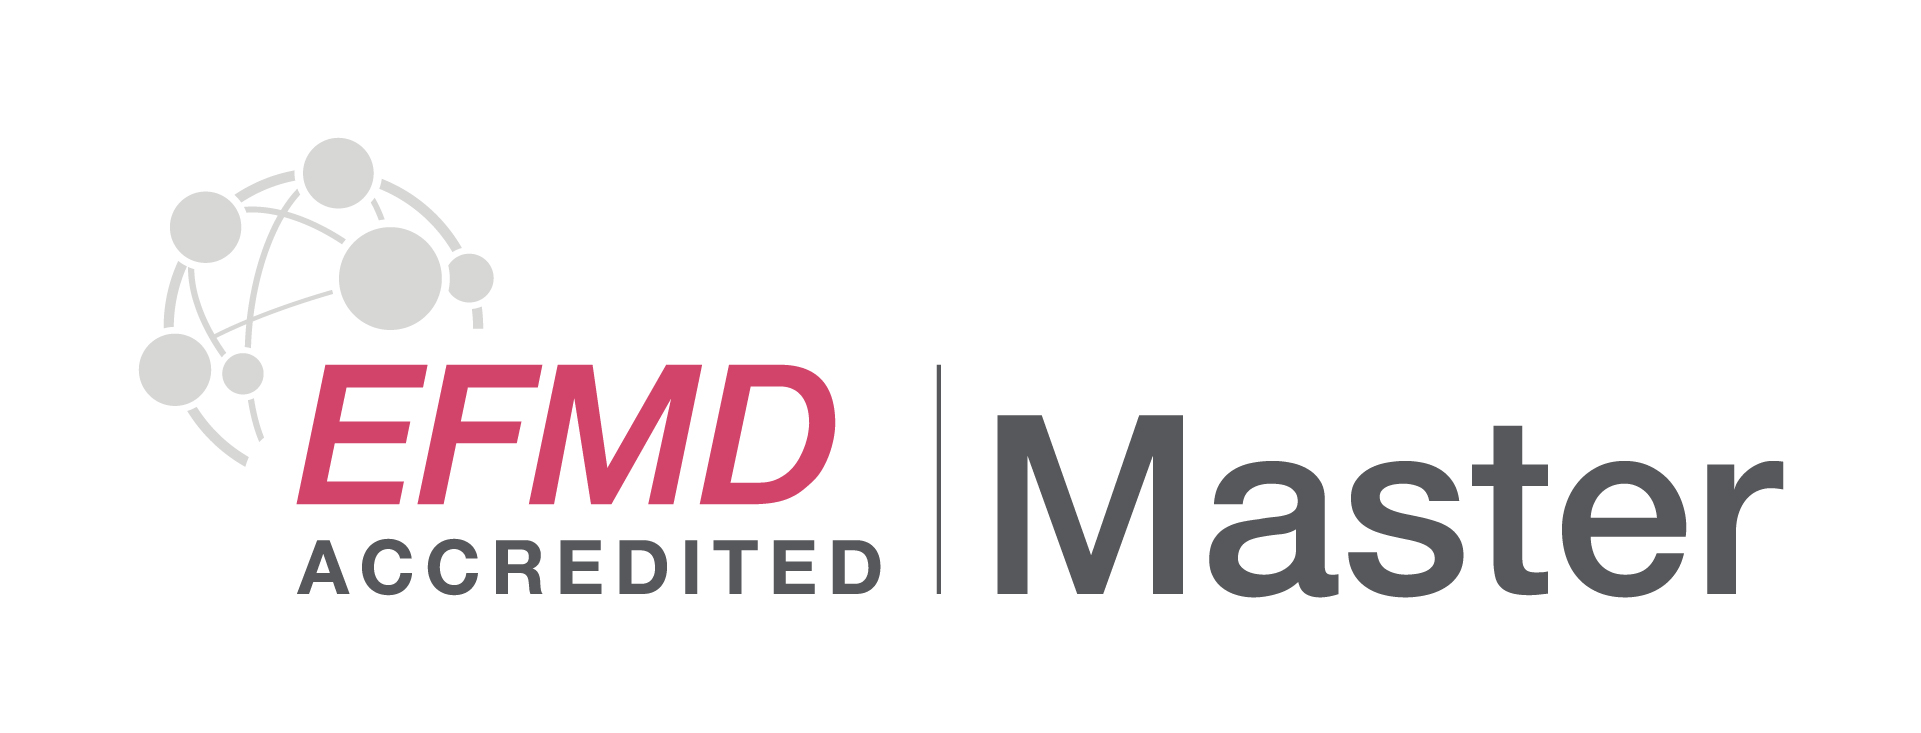 efmd-accreditated-master